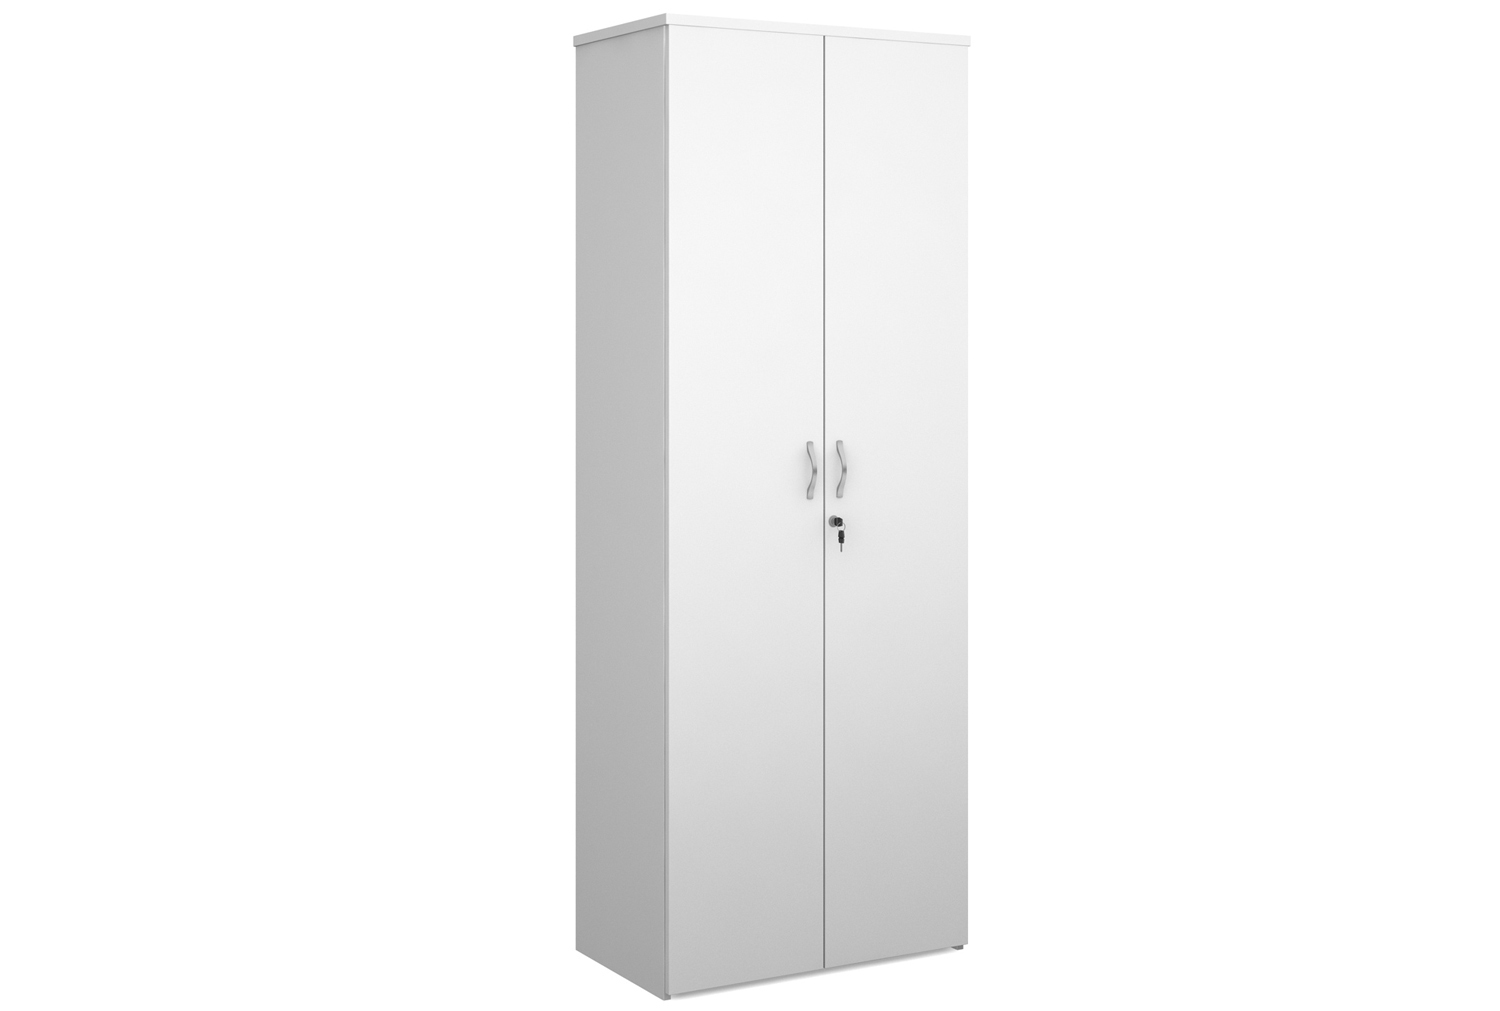 Tully Double Door Office Cupboards, 5 Shelf - 80wx47dx214h (cm), White, Fully Installed